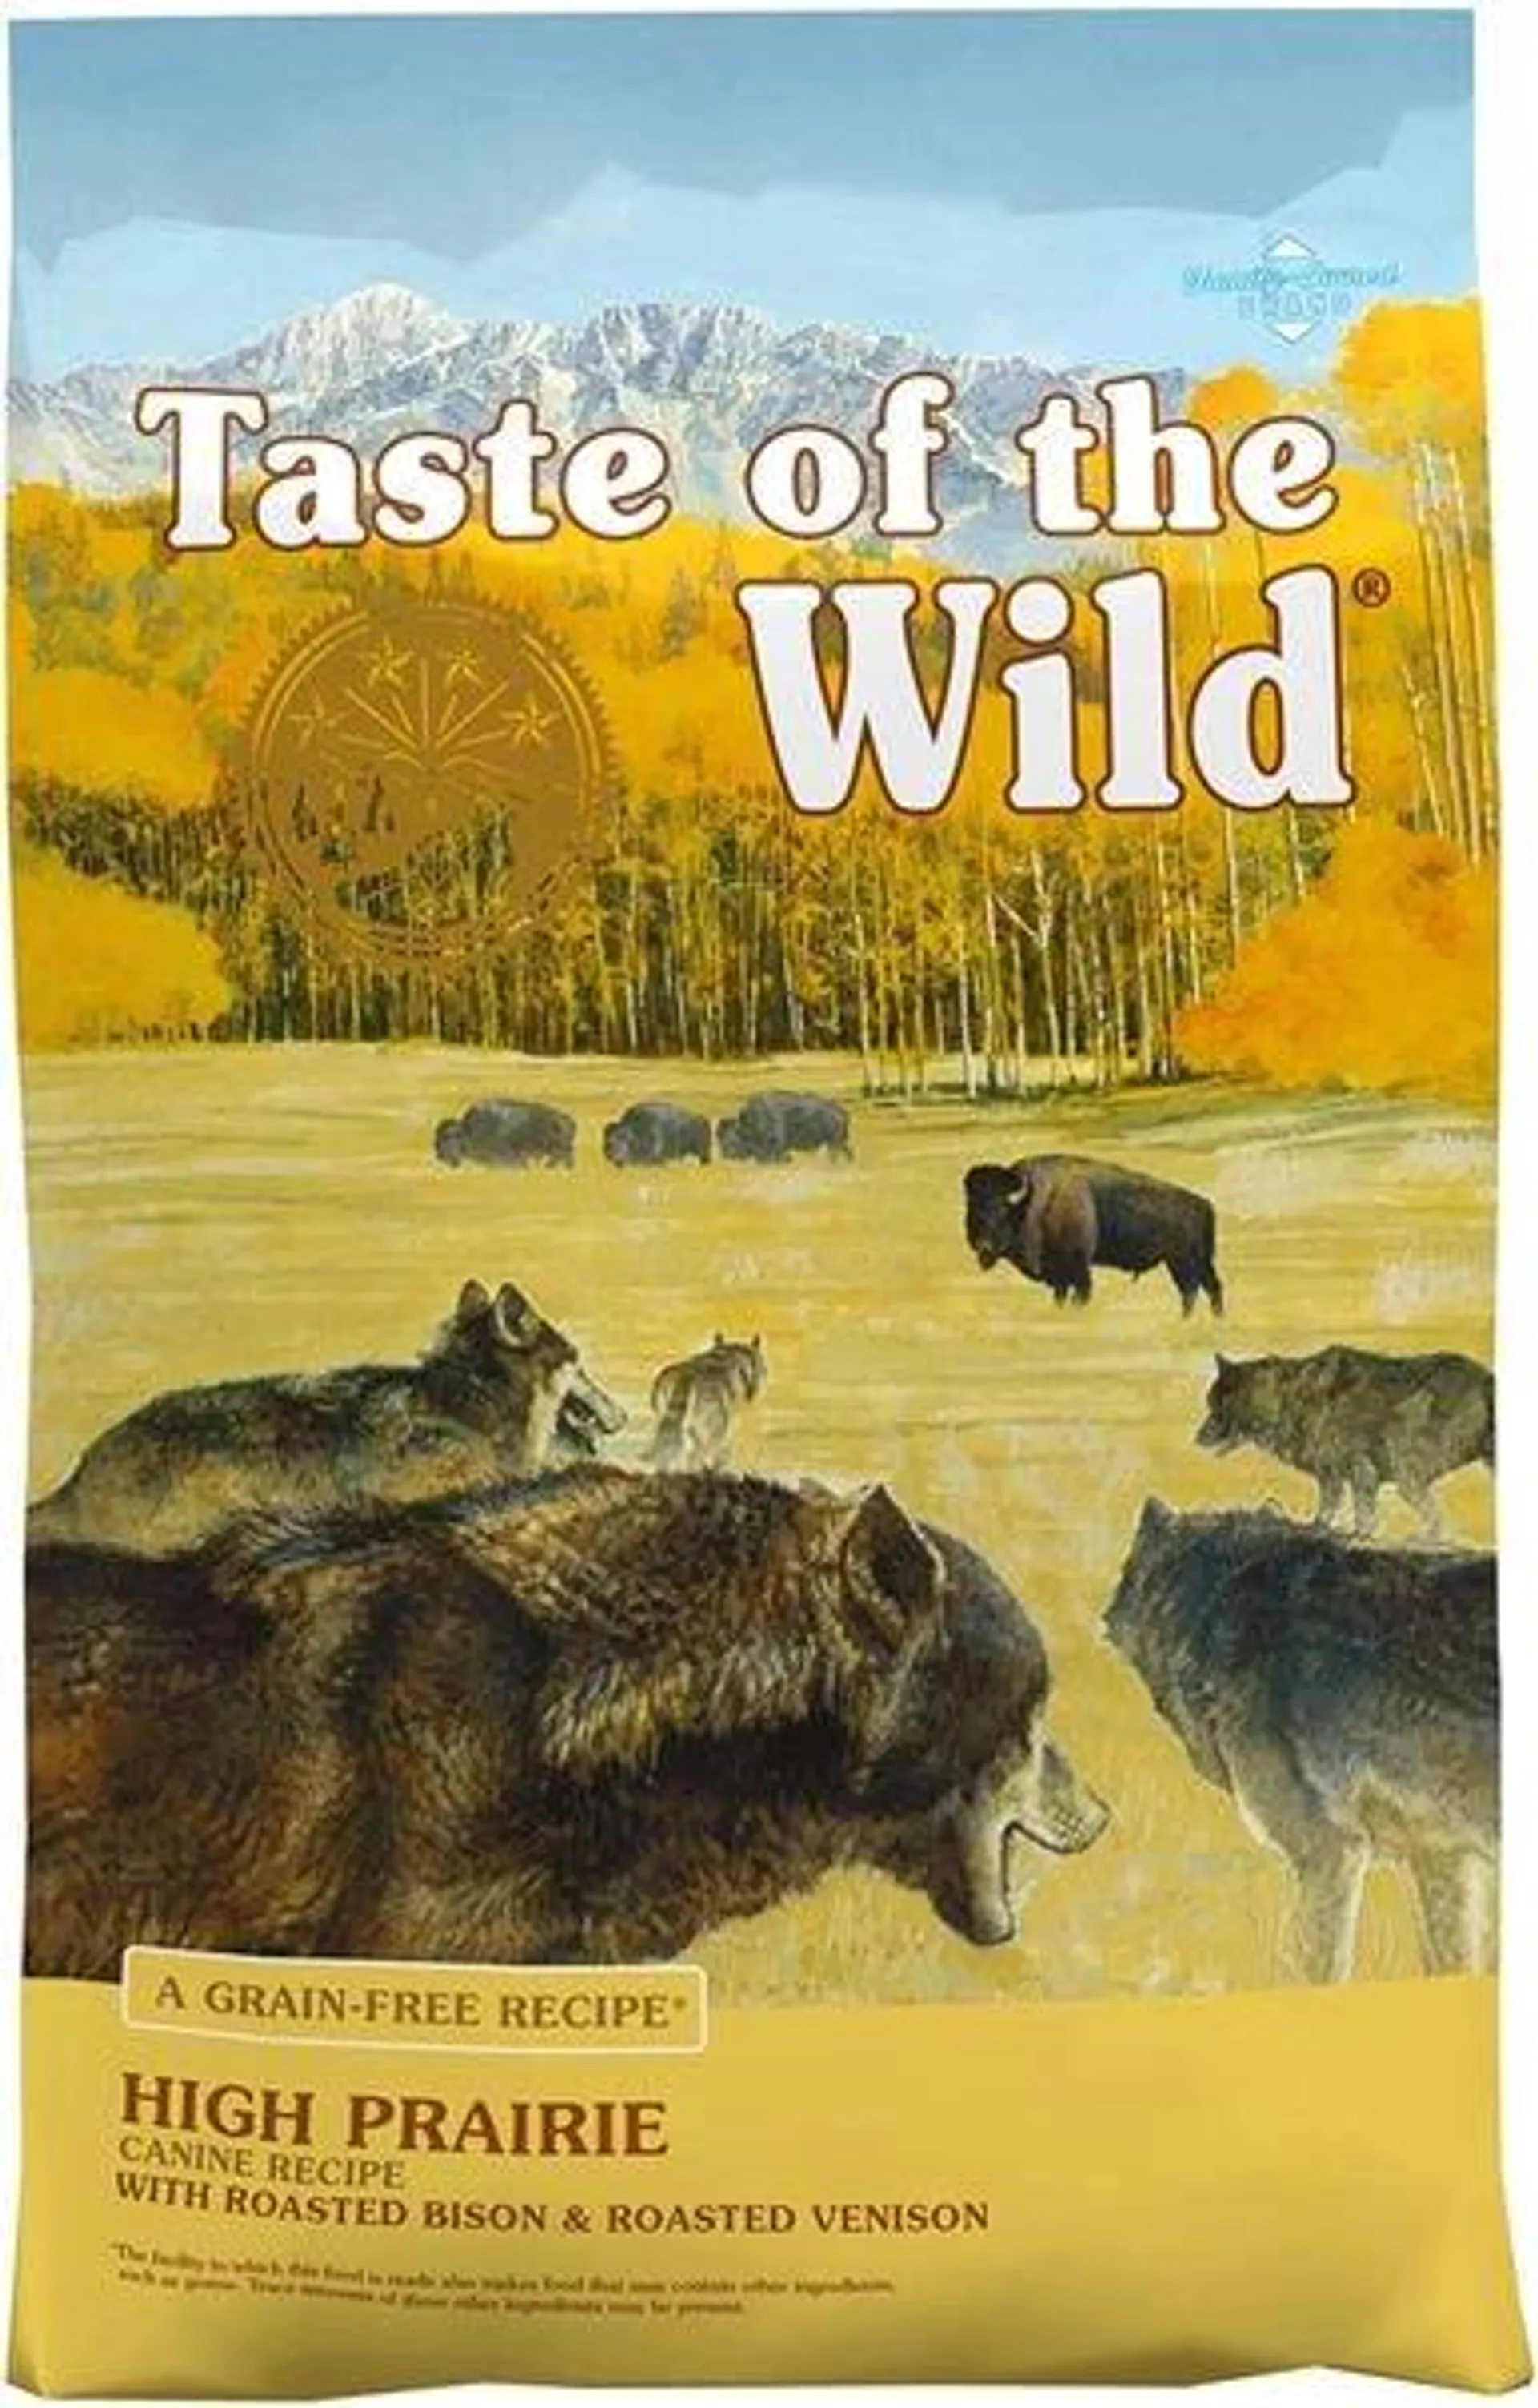 Taste of the Wild® High Prairie Canine® Recipe with Roasted Bison & Roasted Venison, 28 Pounds